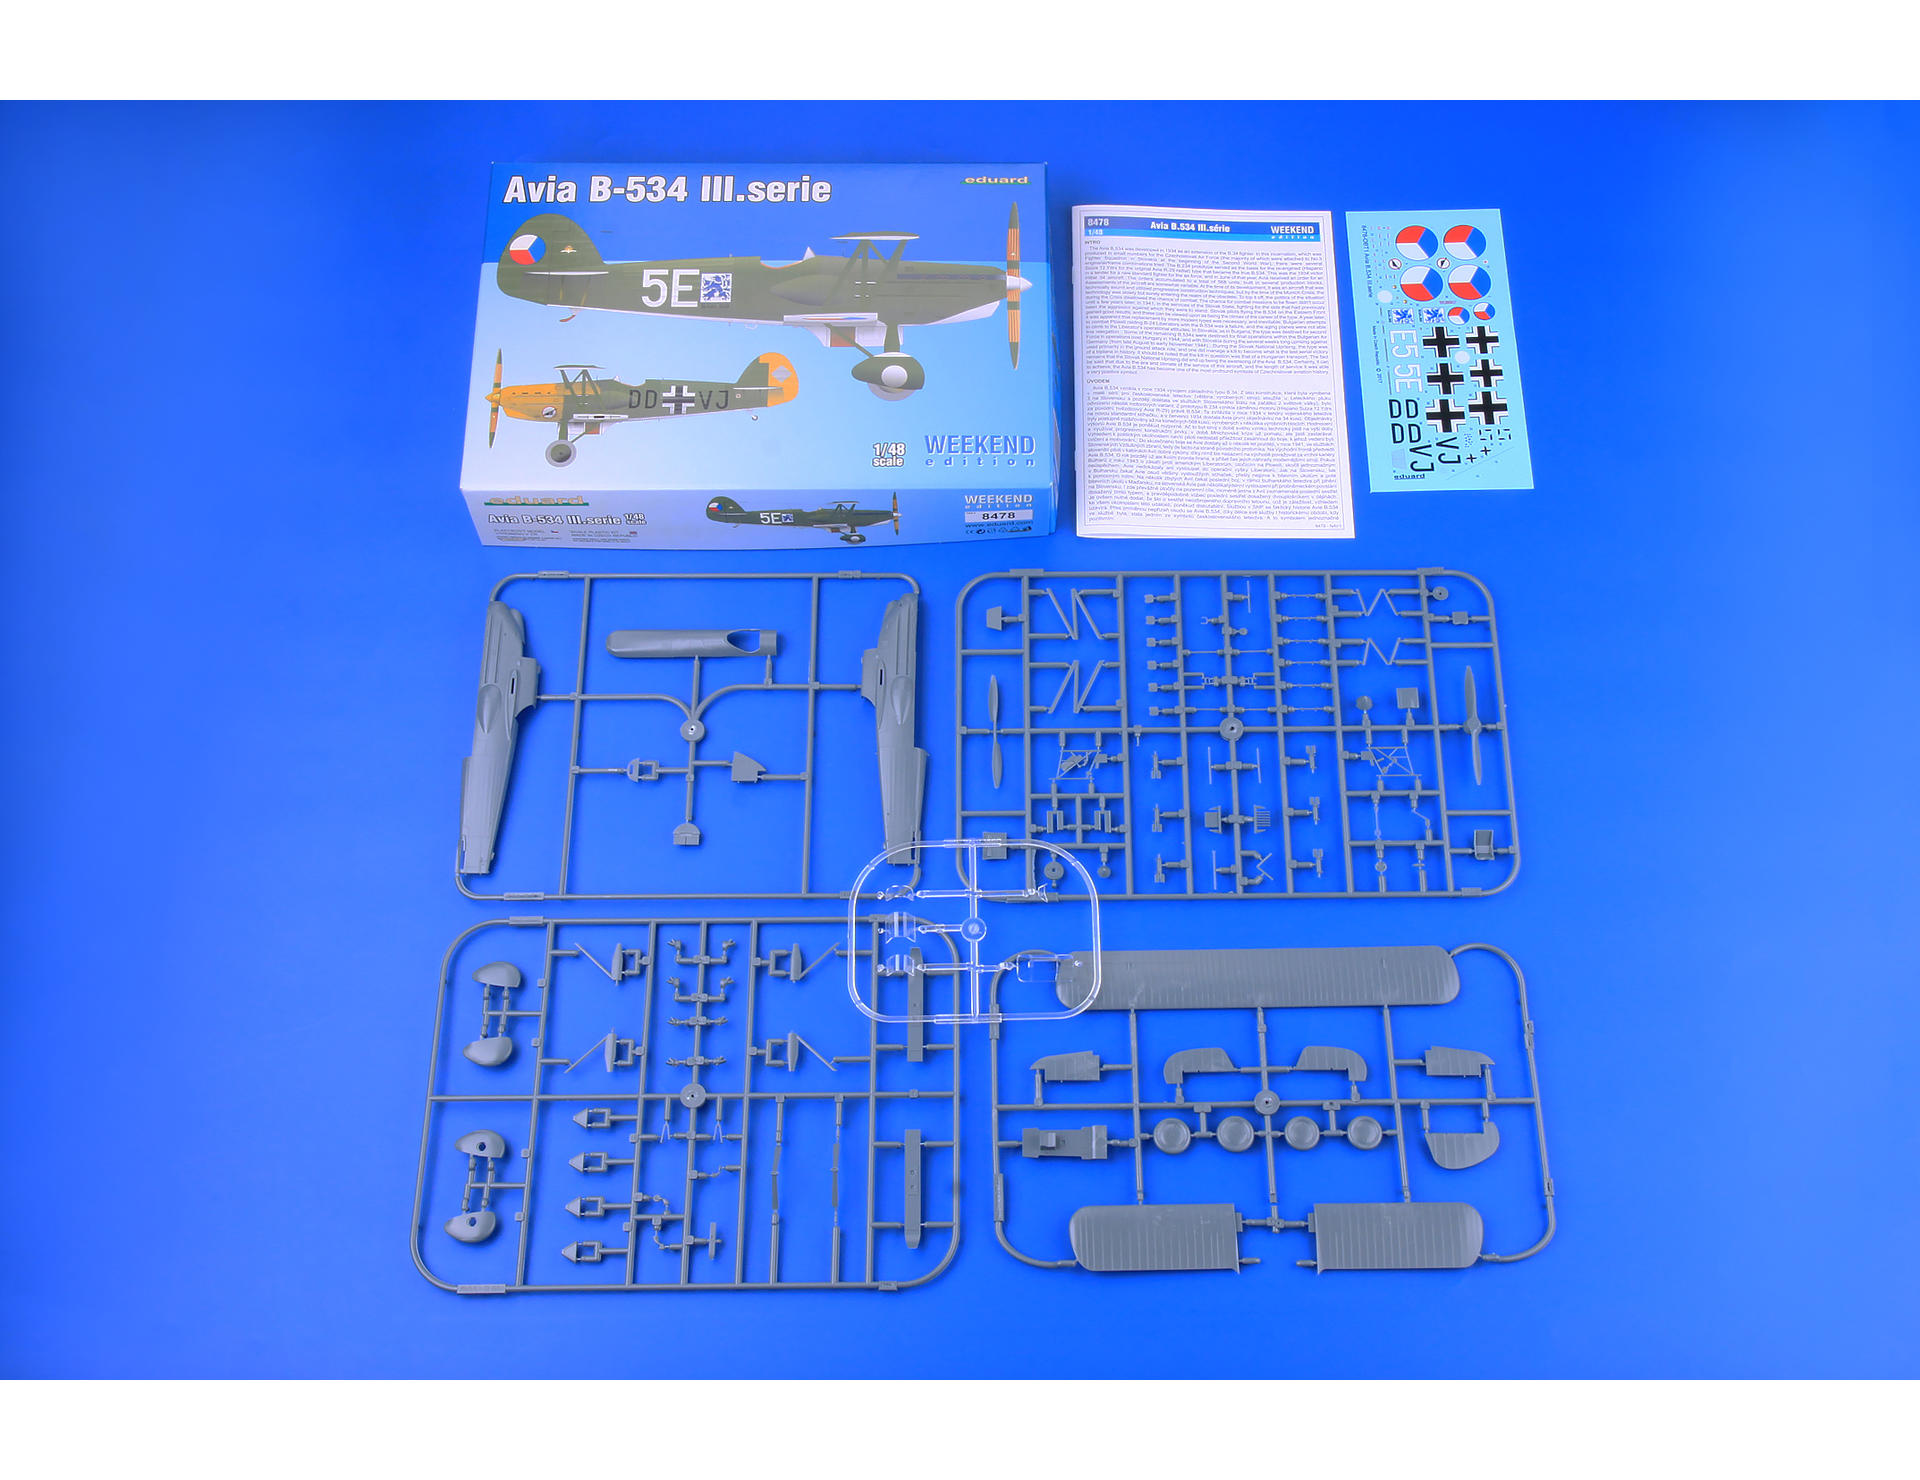 Avia B-534/III serie 1/48 Weekend edition kit of Avia B-534 III. serie in 1/48 scale. - plastic parts: Eduard - No. of decal options: 2 - decals: Eduard - PE parts: no - painting mask: no - resin parts: no